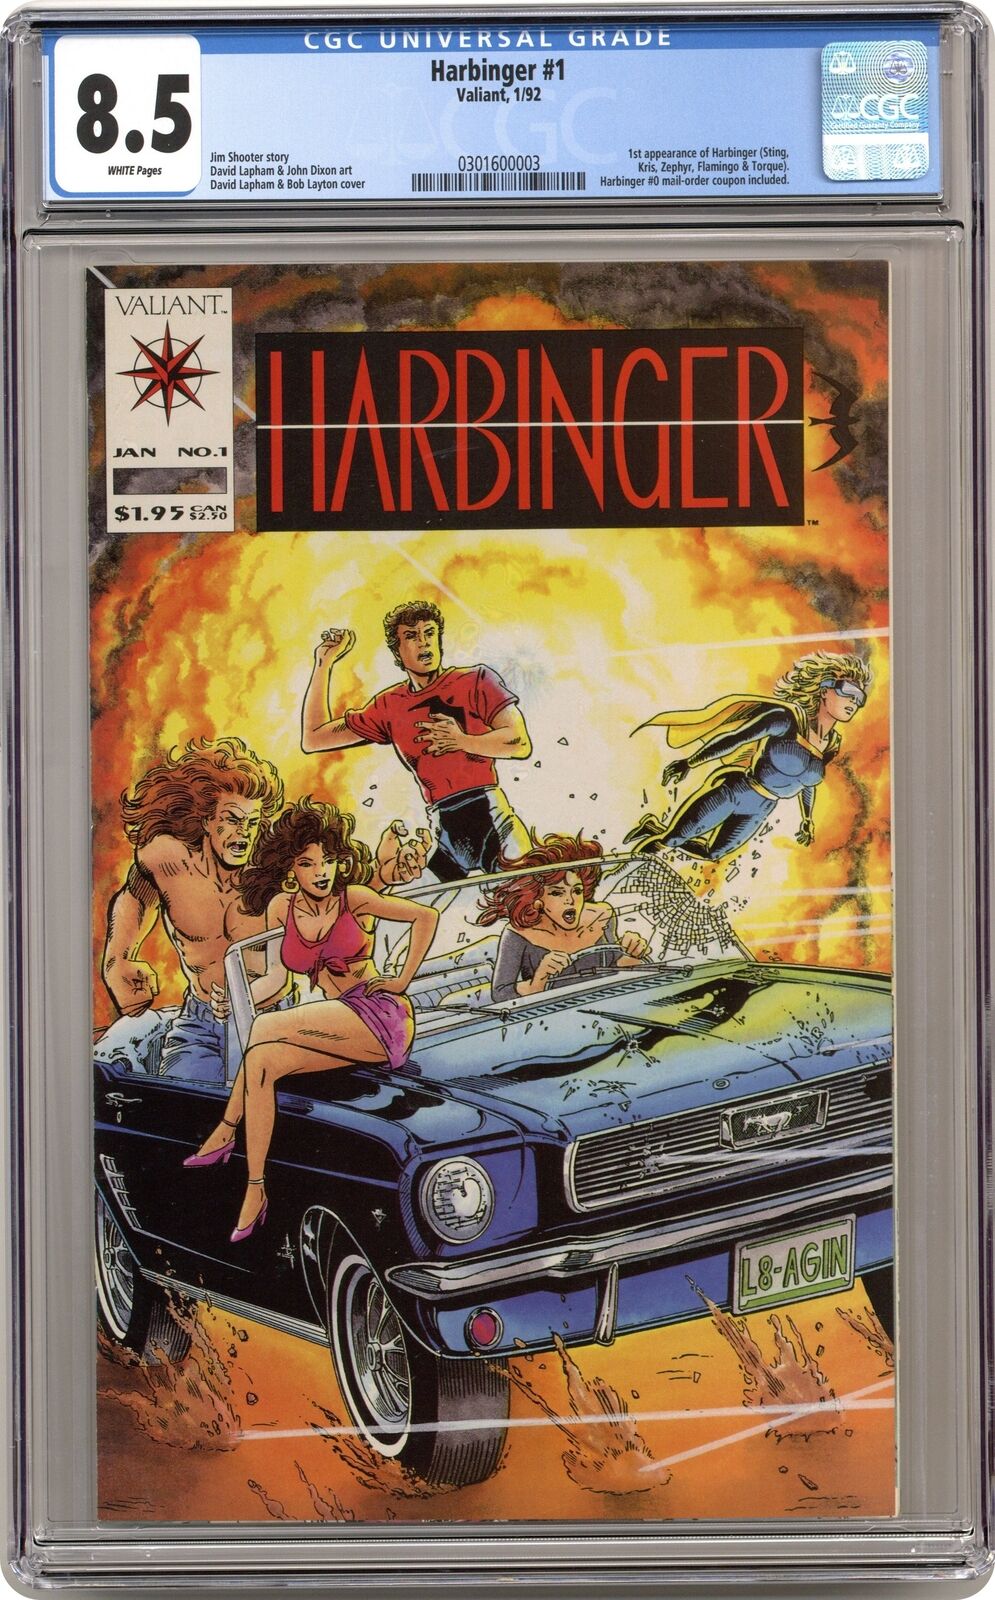 Harbinger 1D Coup. Included CGC 8.5 1992 0301600003